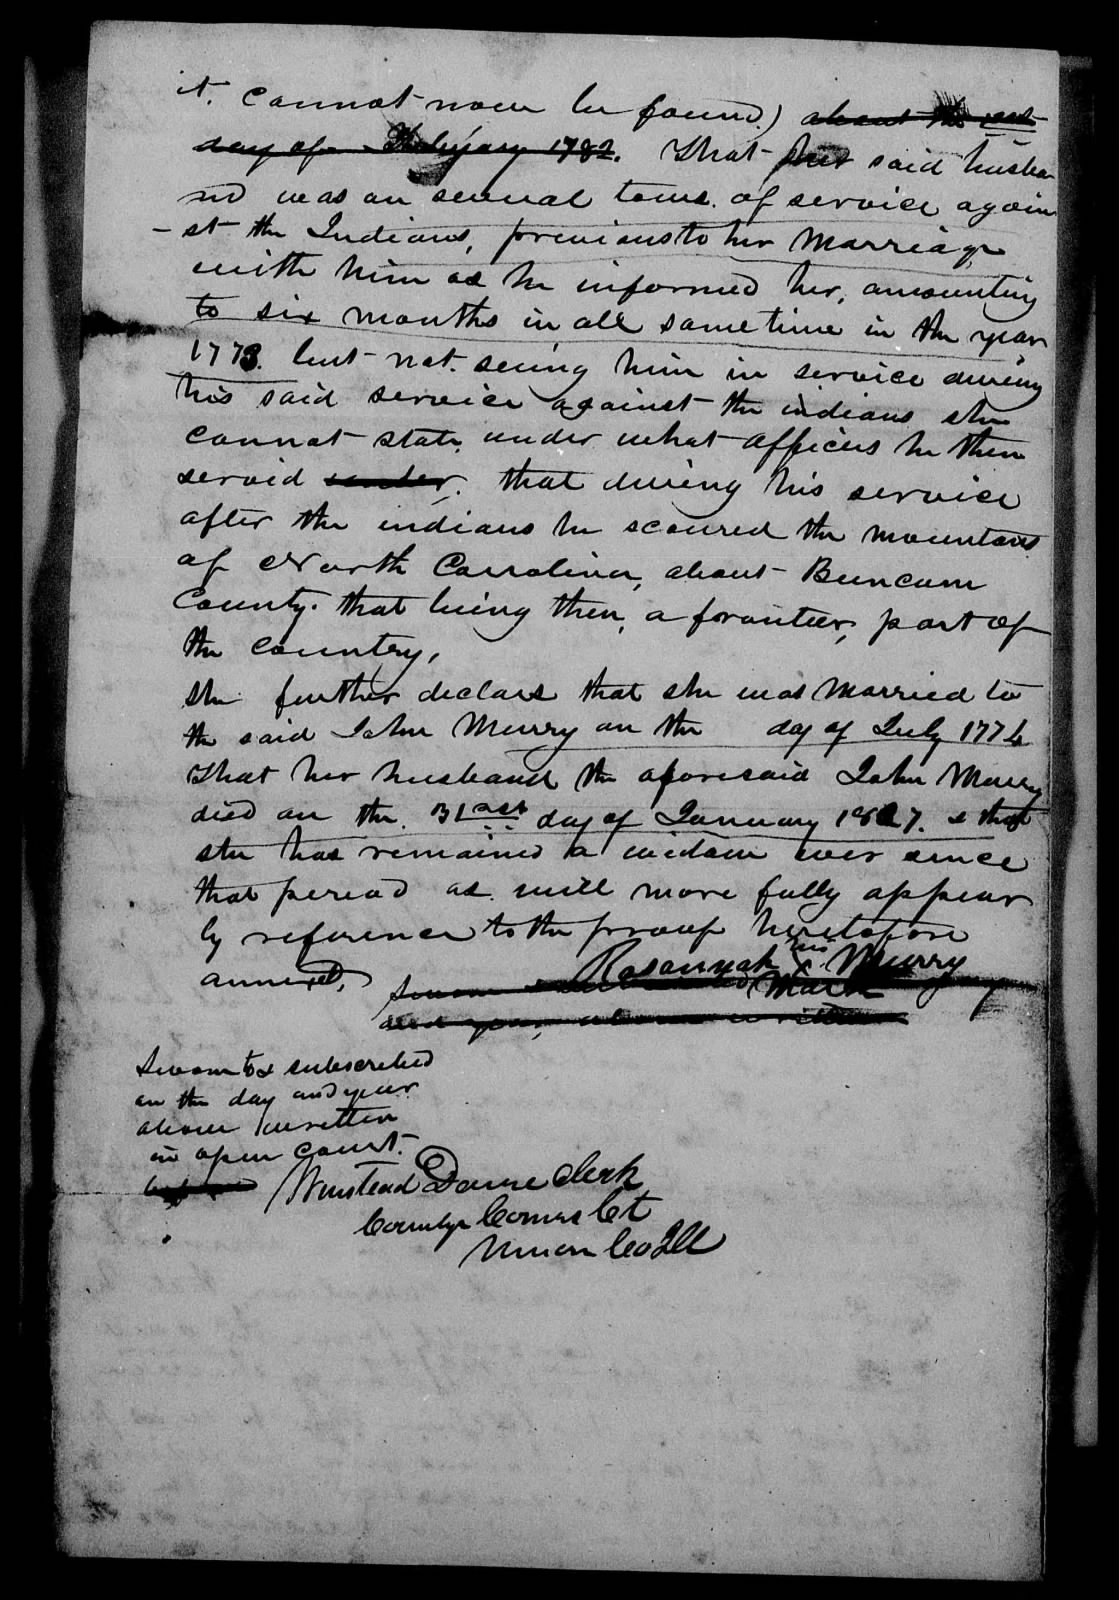 Application for a Widow's Pension from Rosana Murray, 9 November 1836, page 2